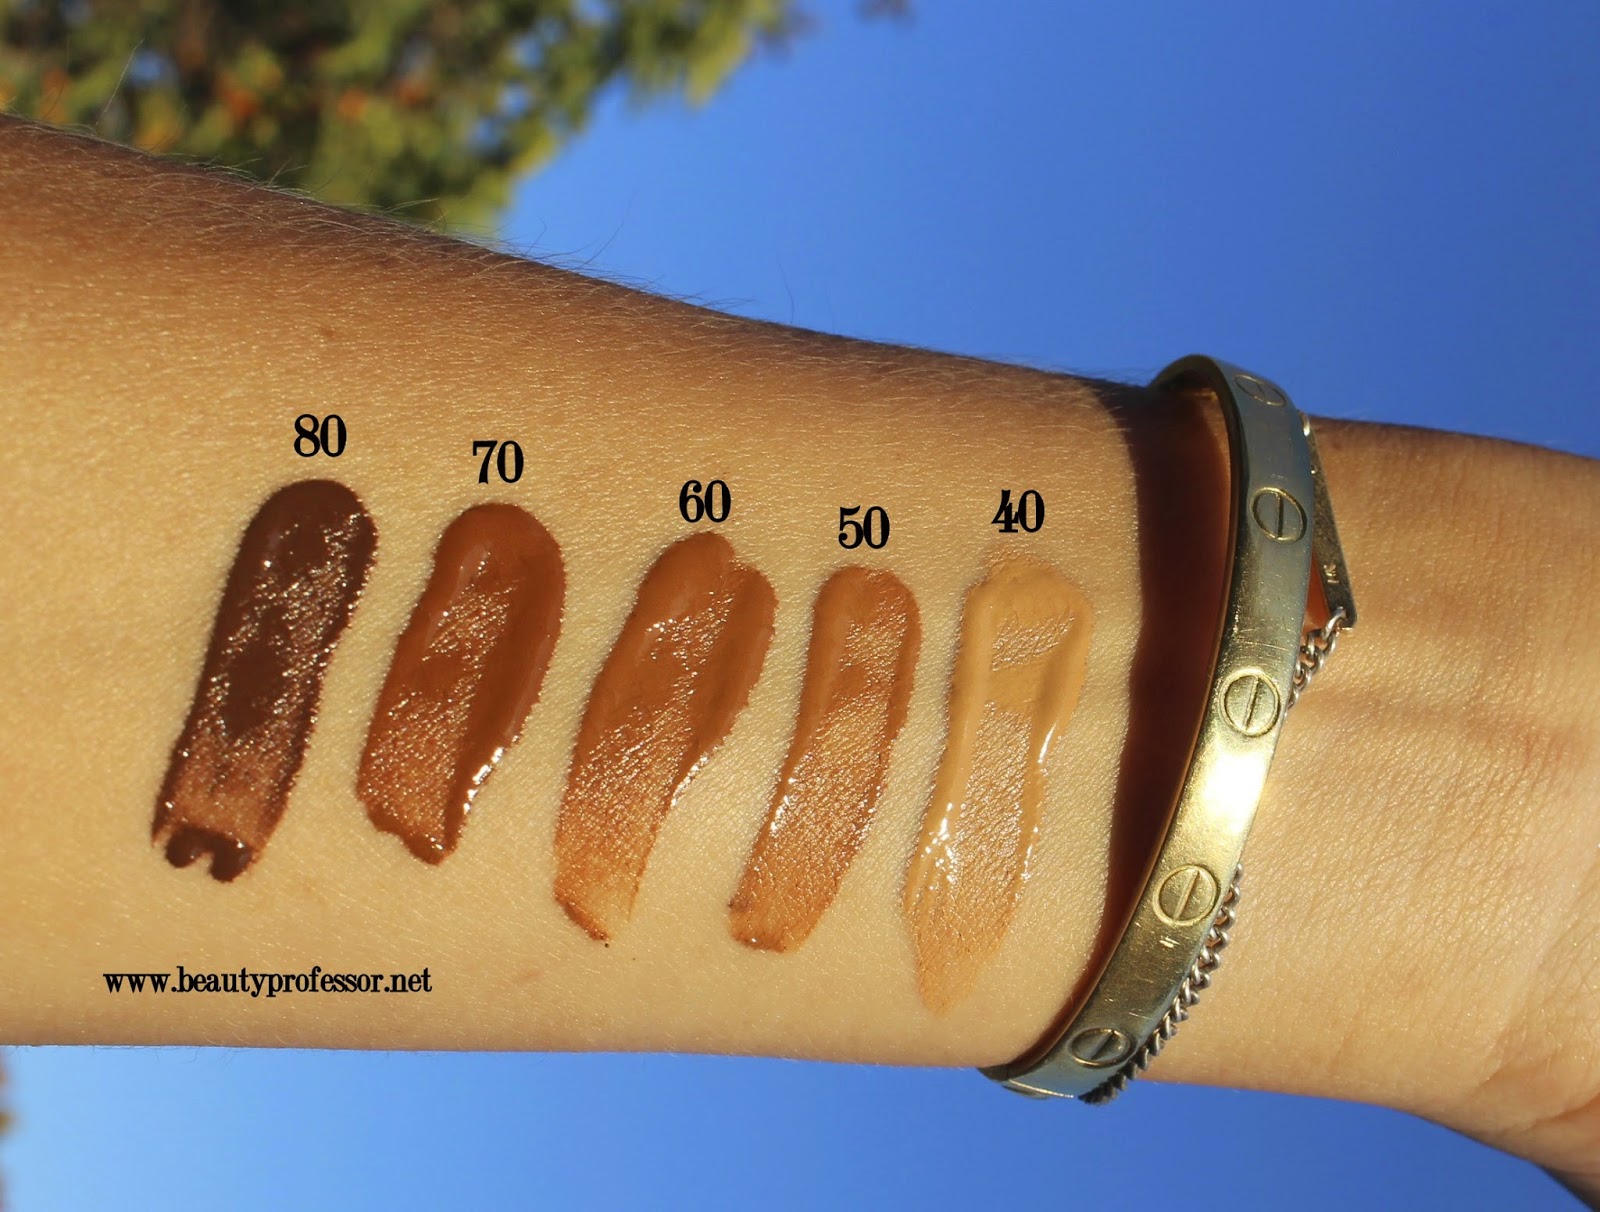 By Terry Cover ExpertSwatches of ALL Shade Options - Beauty Professor